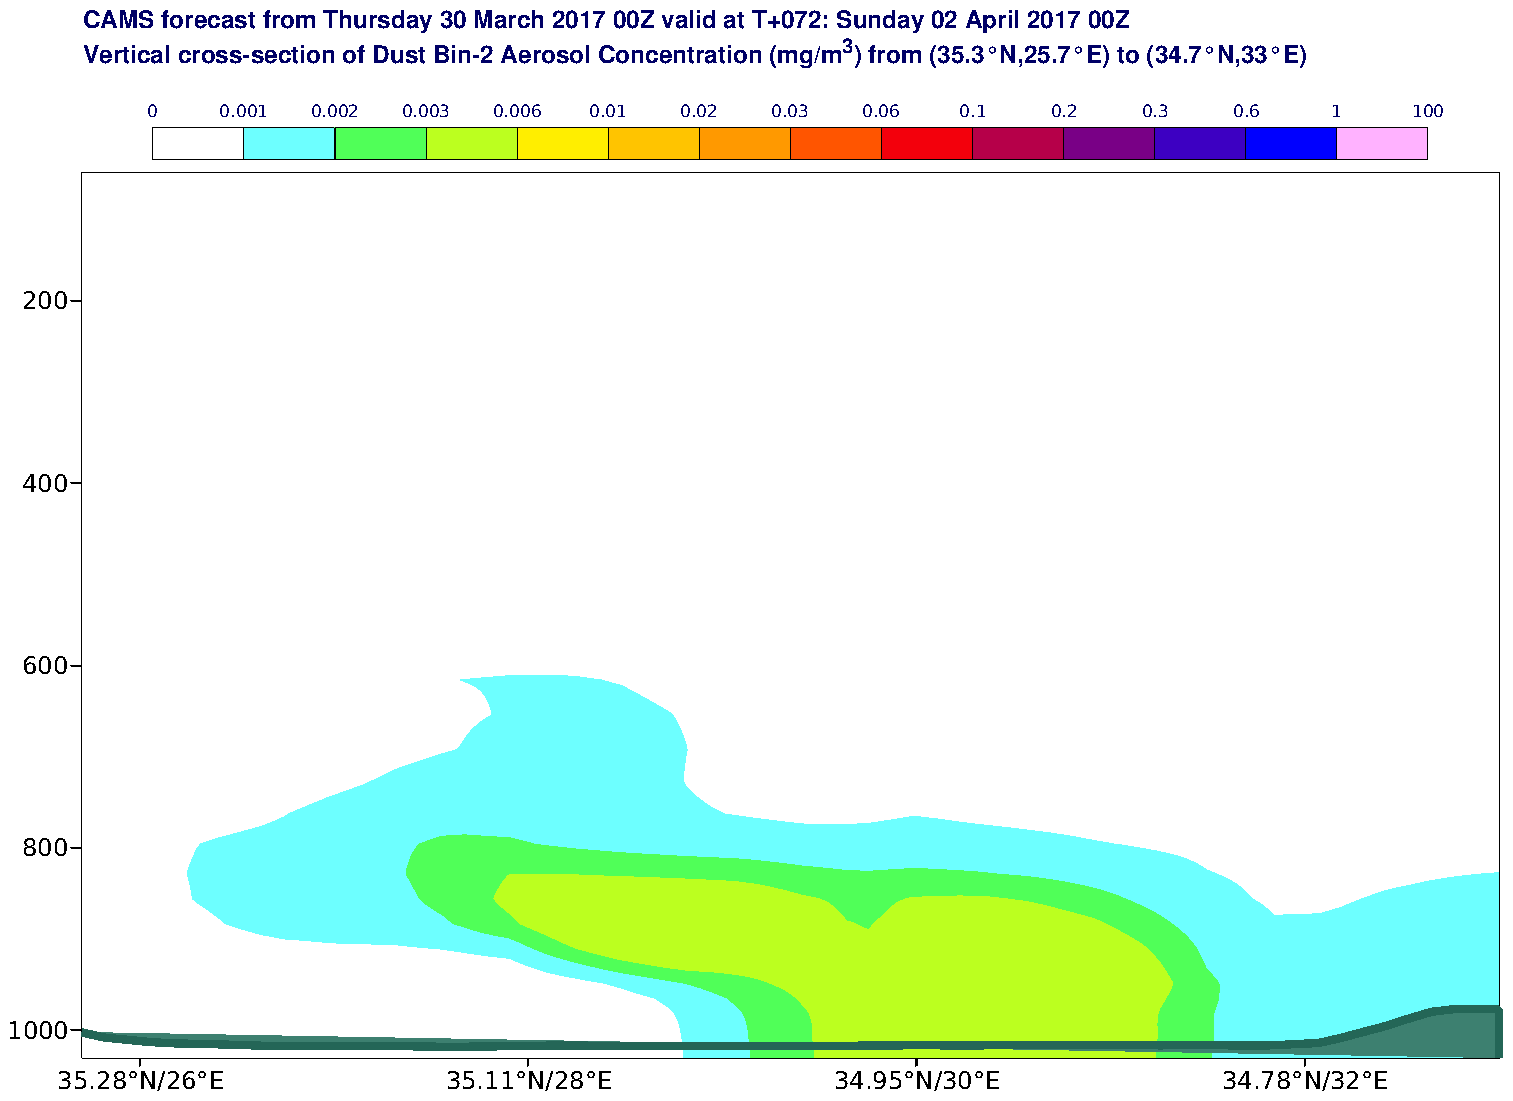 Vertical cross-section of Dust Bin-2 Aerosol Concentration (mg/m3) valid at T72 - 2017-04-02 00:00